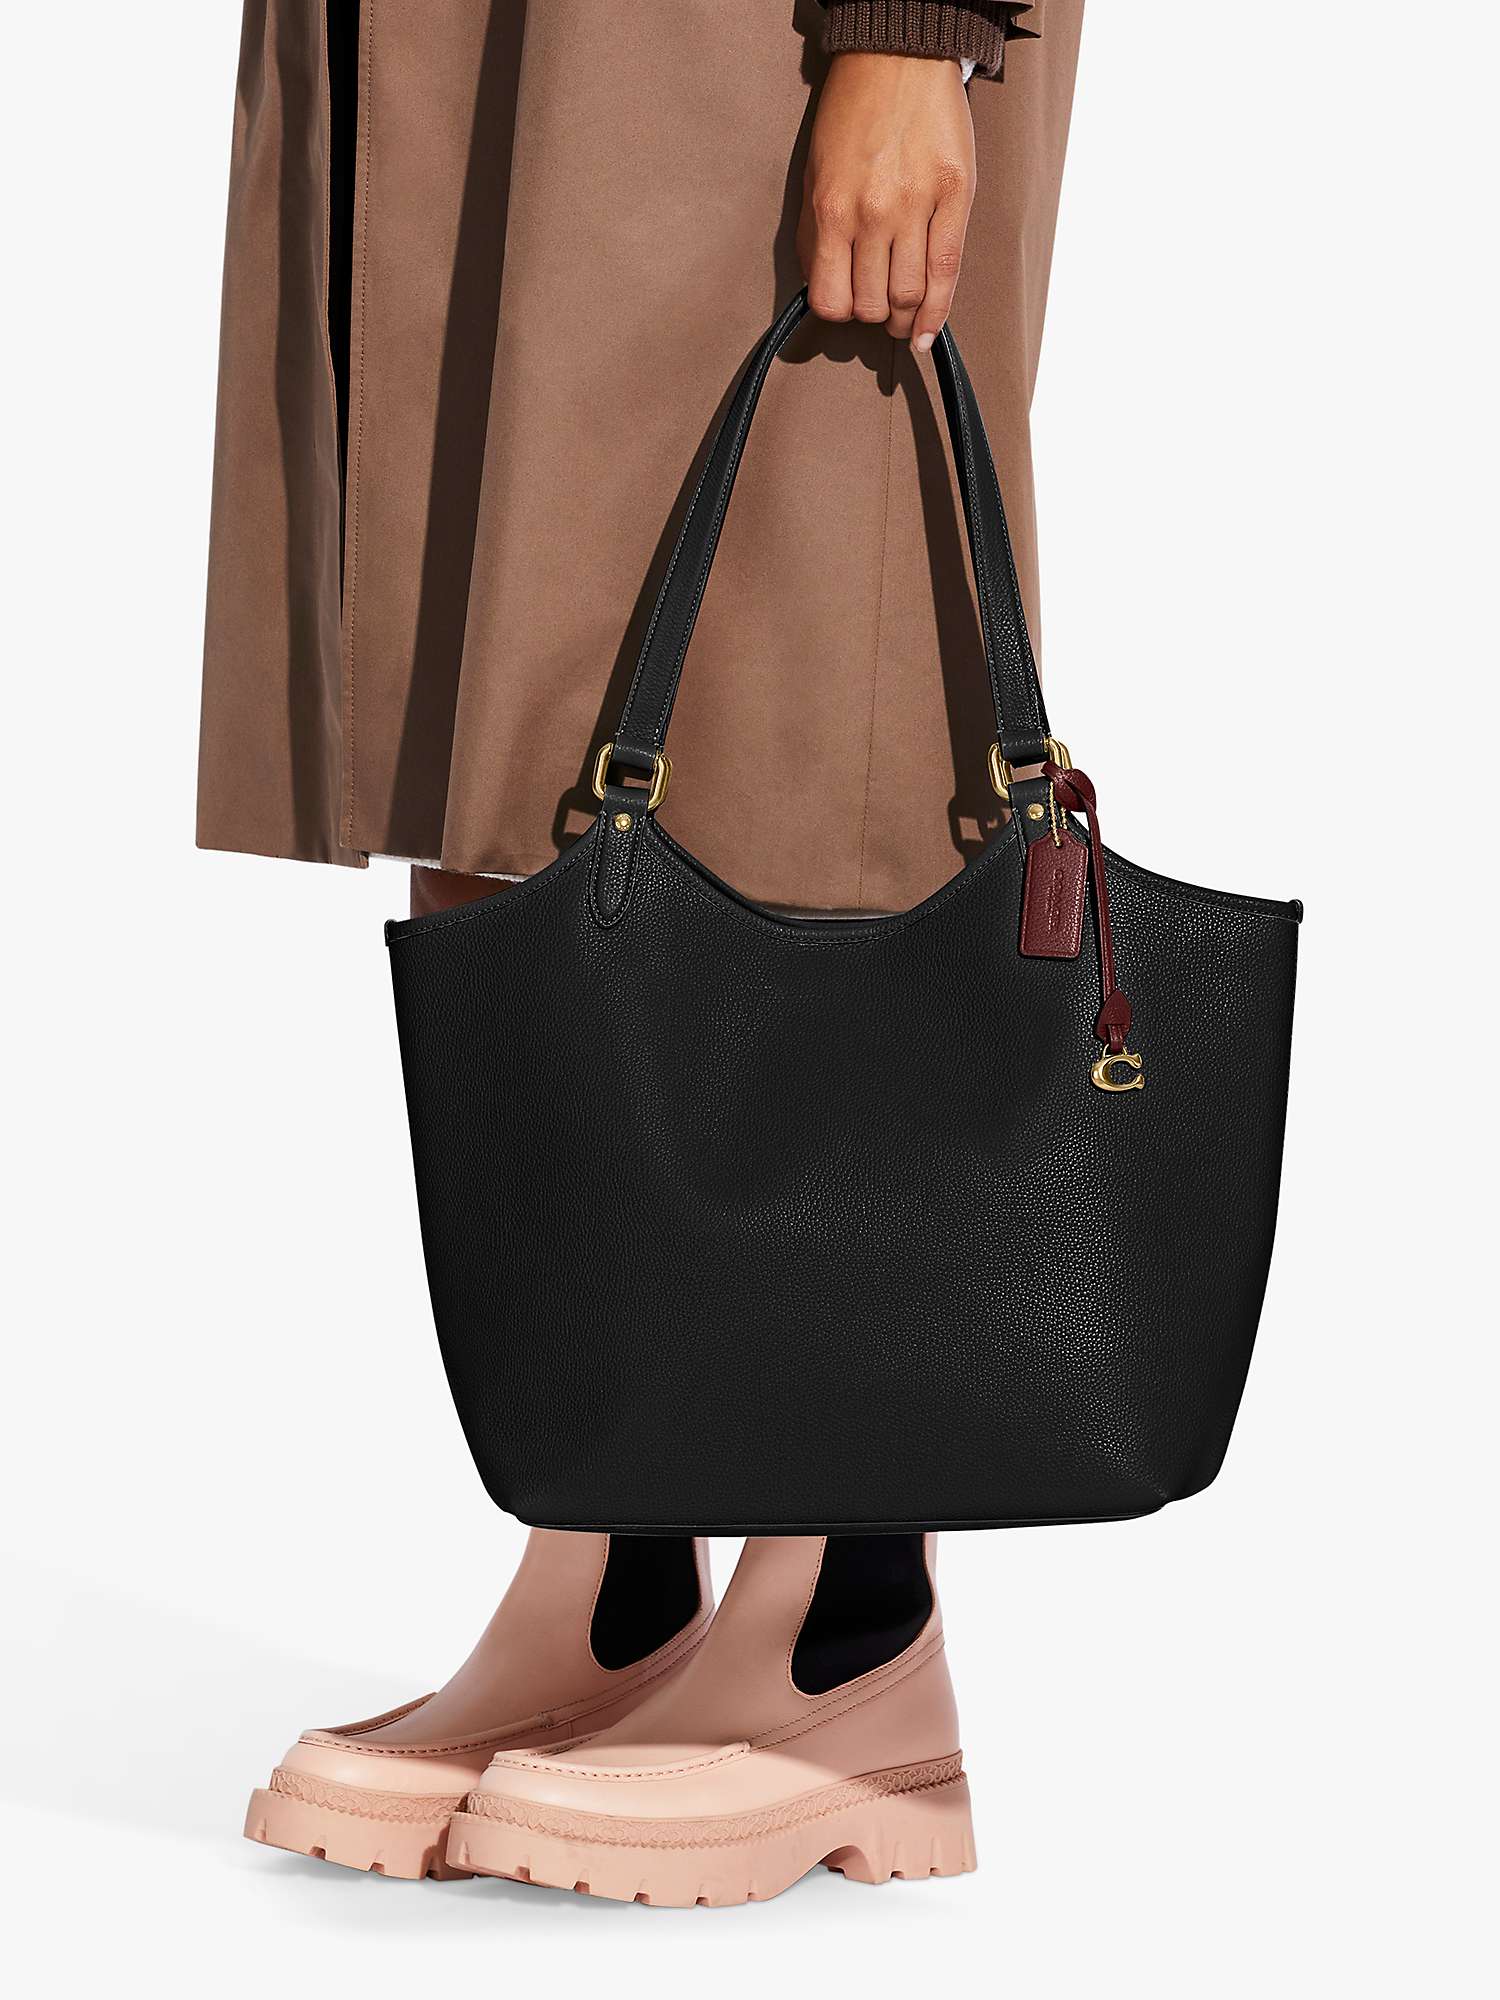 Buy Coach Day Leather Tote Bag Online at johnlewis.com